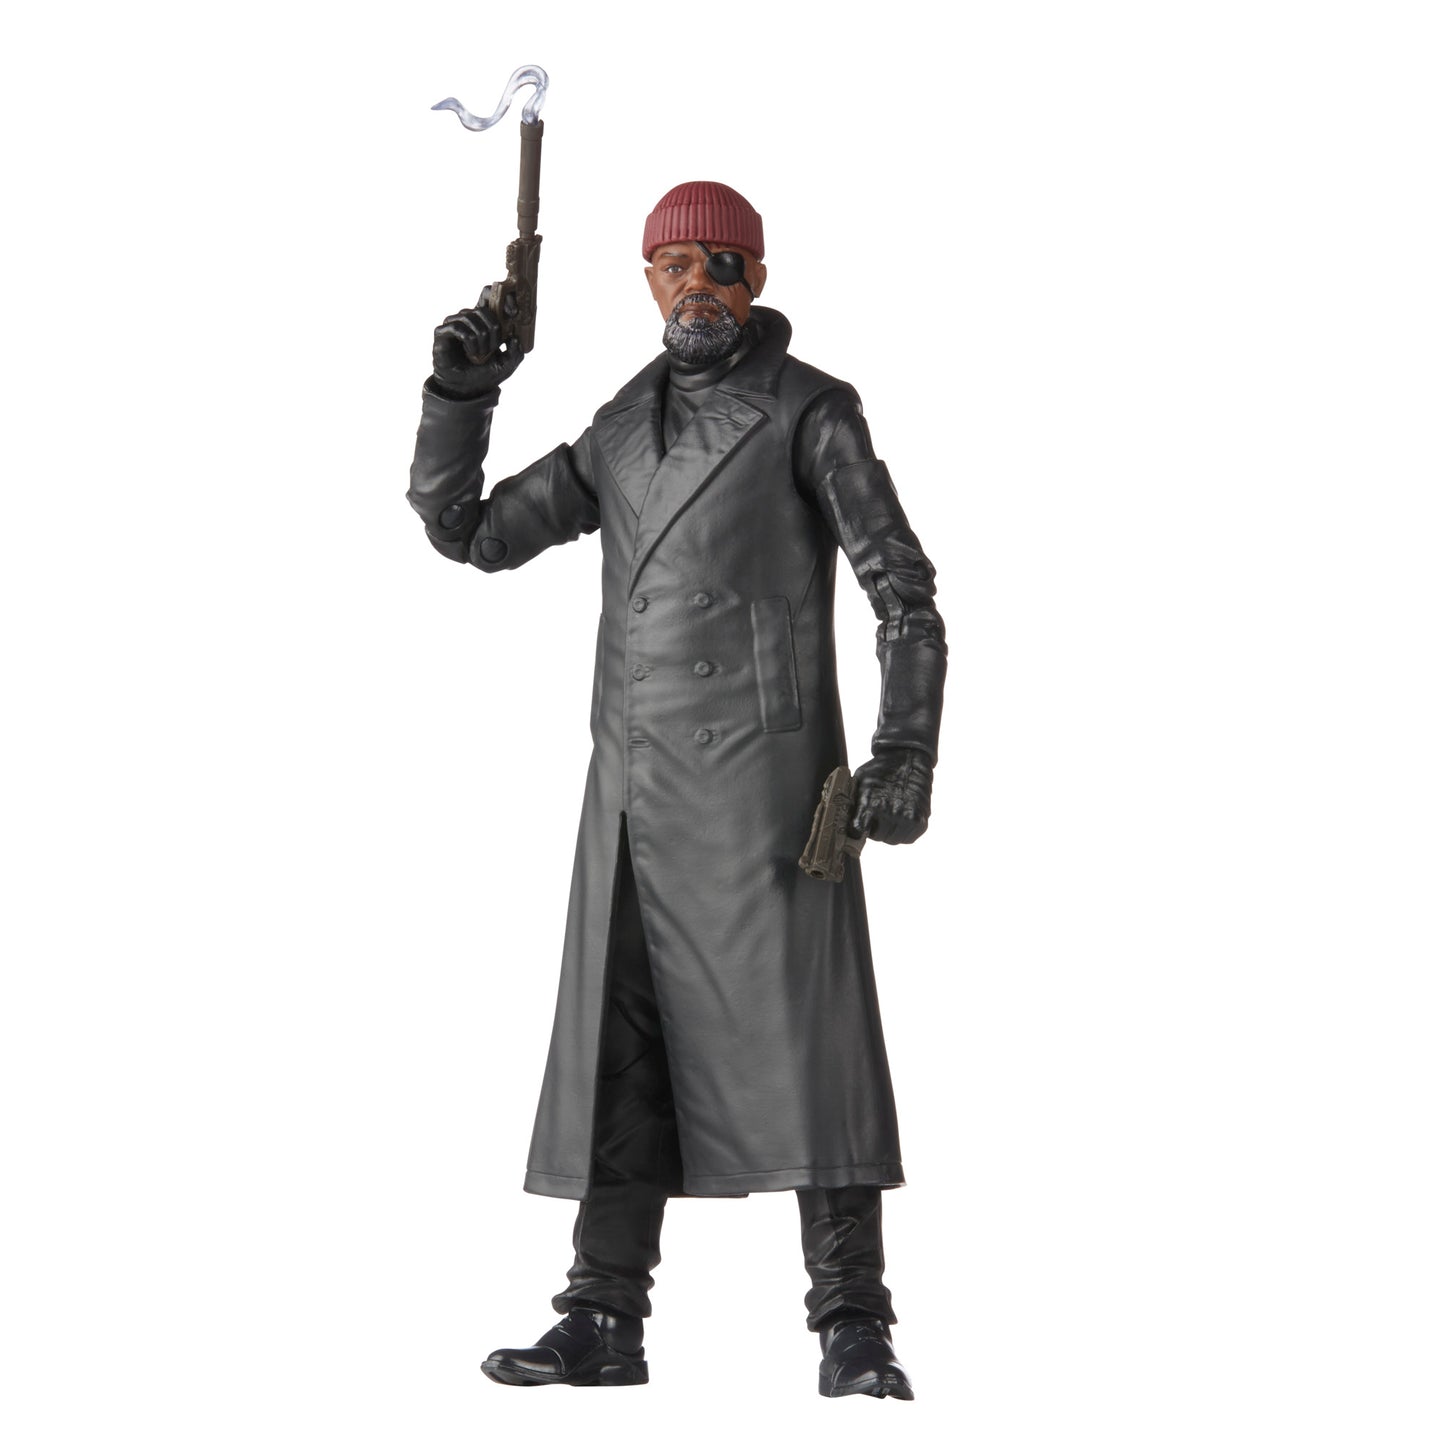 Marvel Legends Series Nick Fury Action Figure 6-Inch Toy - Heretoserveyou